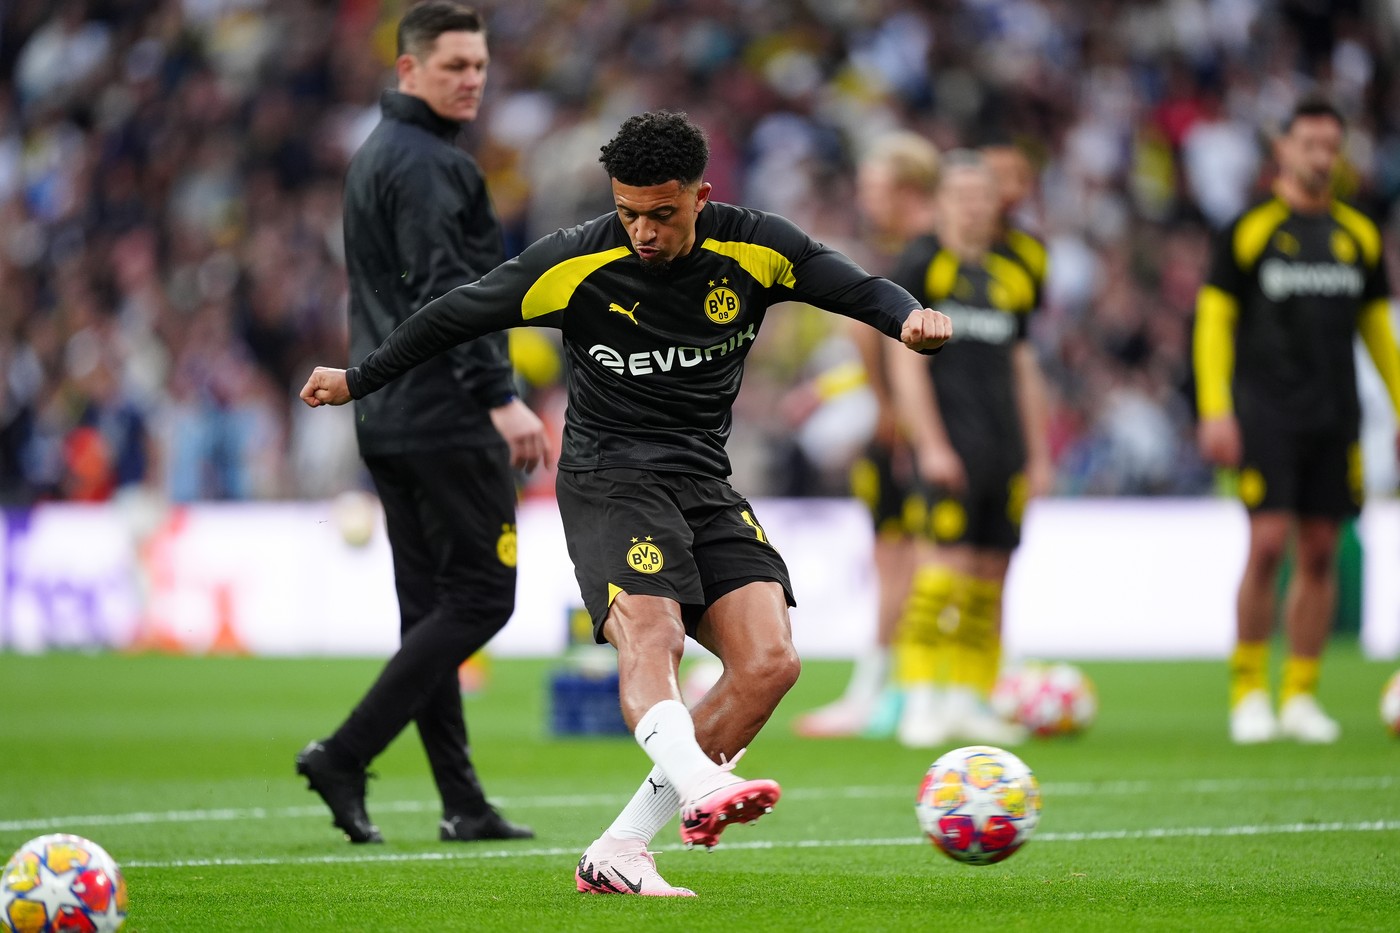 Borussia Dortmund's Jadon Sancho attempts a shot during the warm up ahead of the UEFA Champions League final at Wembley Stadium in London. Picture date: Saturday June 1, 2024.,Image: 878161690, License: Rights-managed, Restrictions: Use subject to restrictions. Editorial use only, no commercial use without prior consent from rights holder., Model Release: no